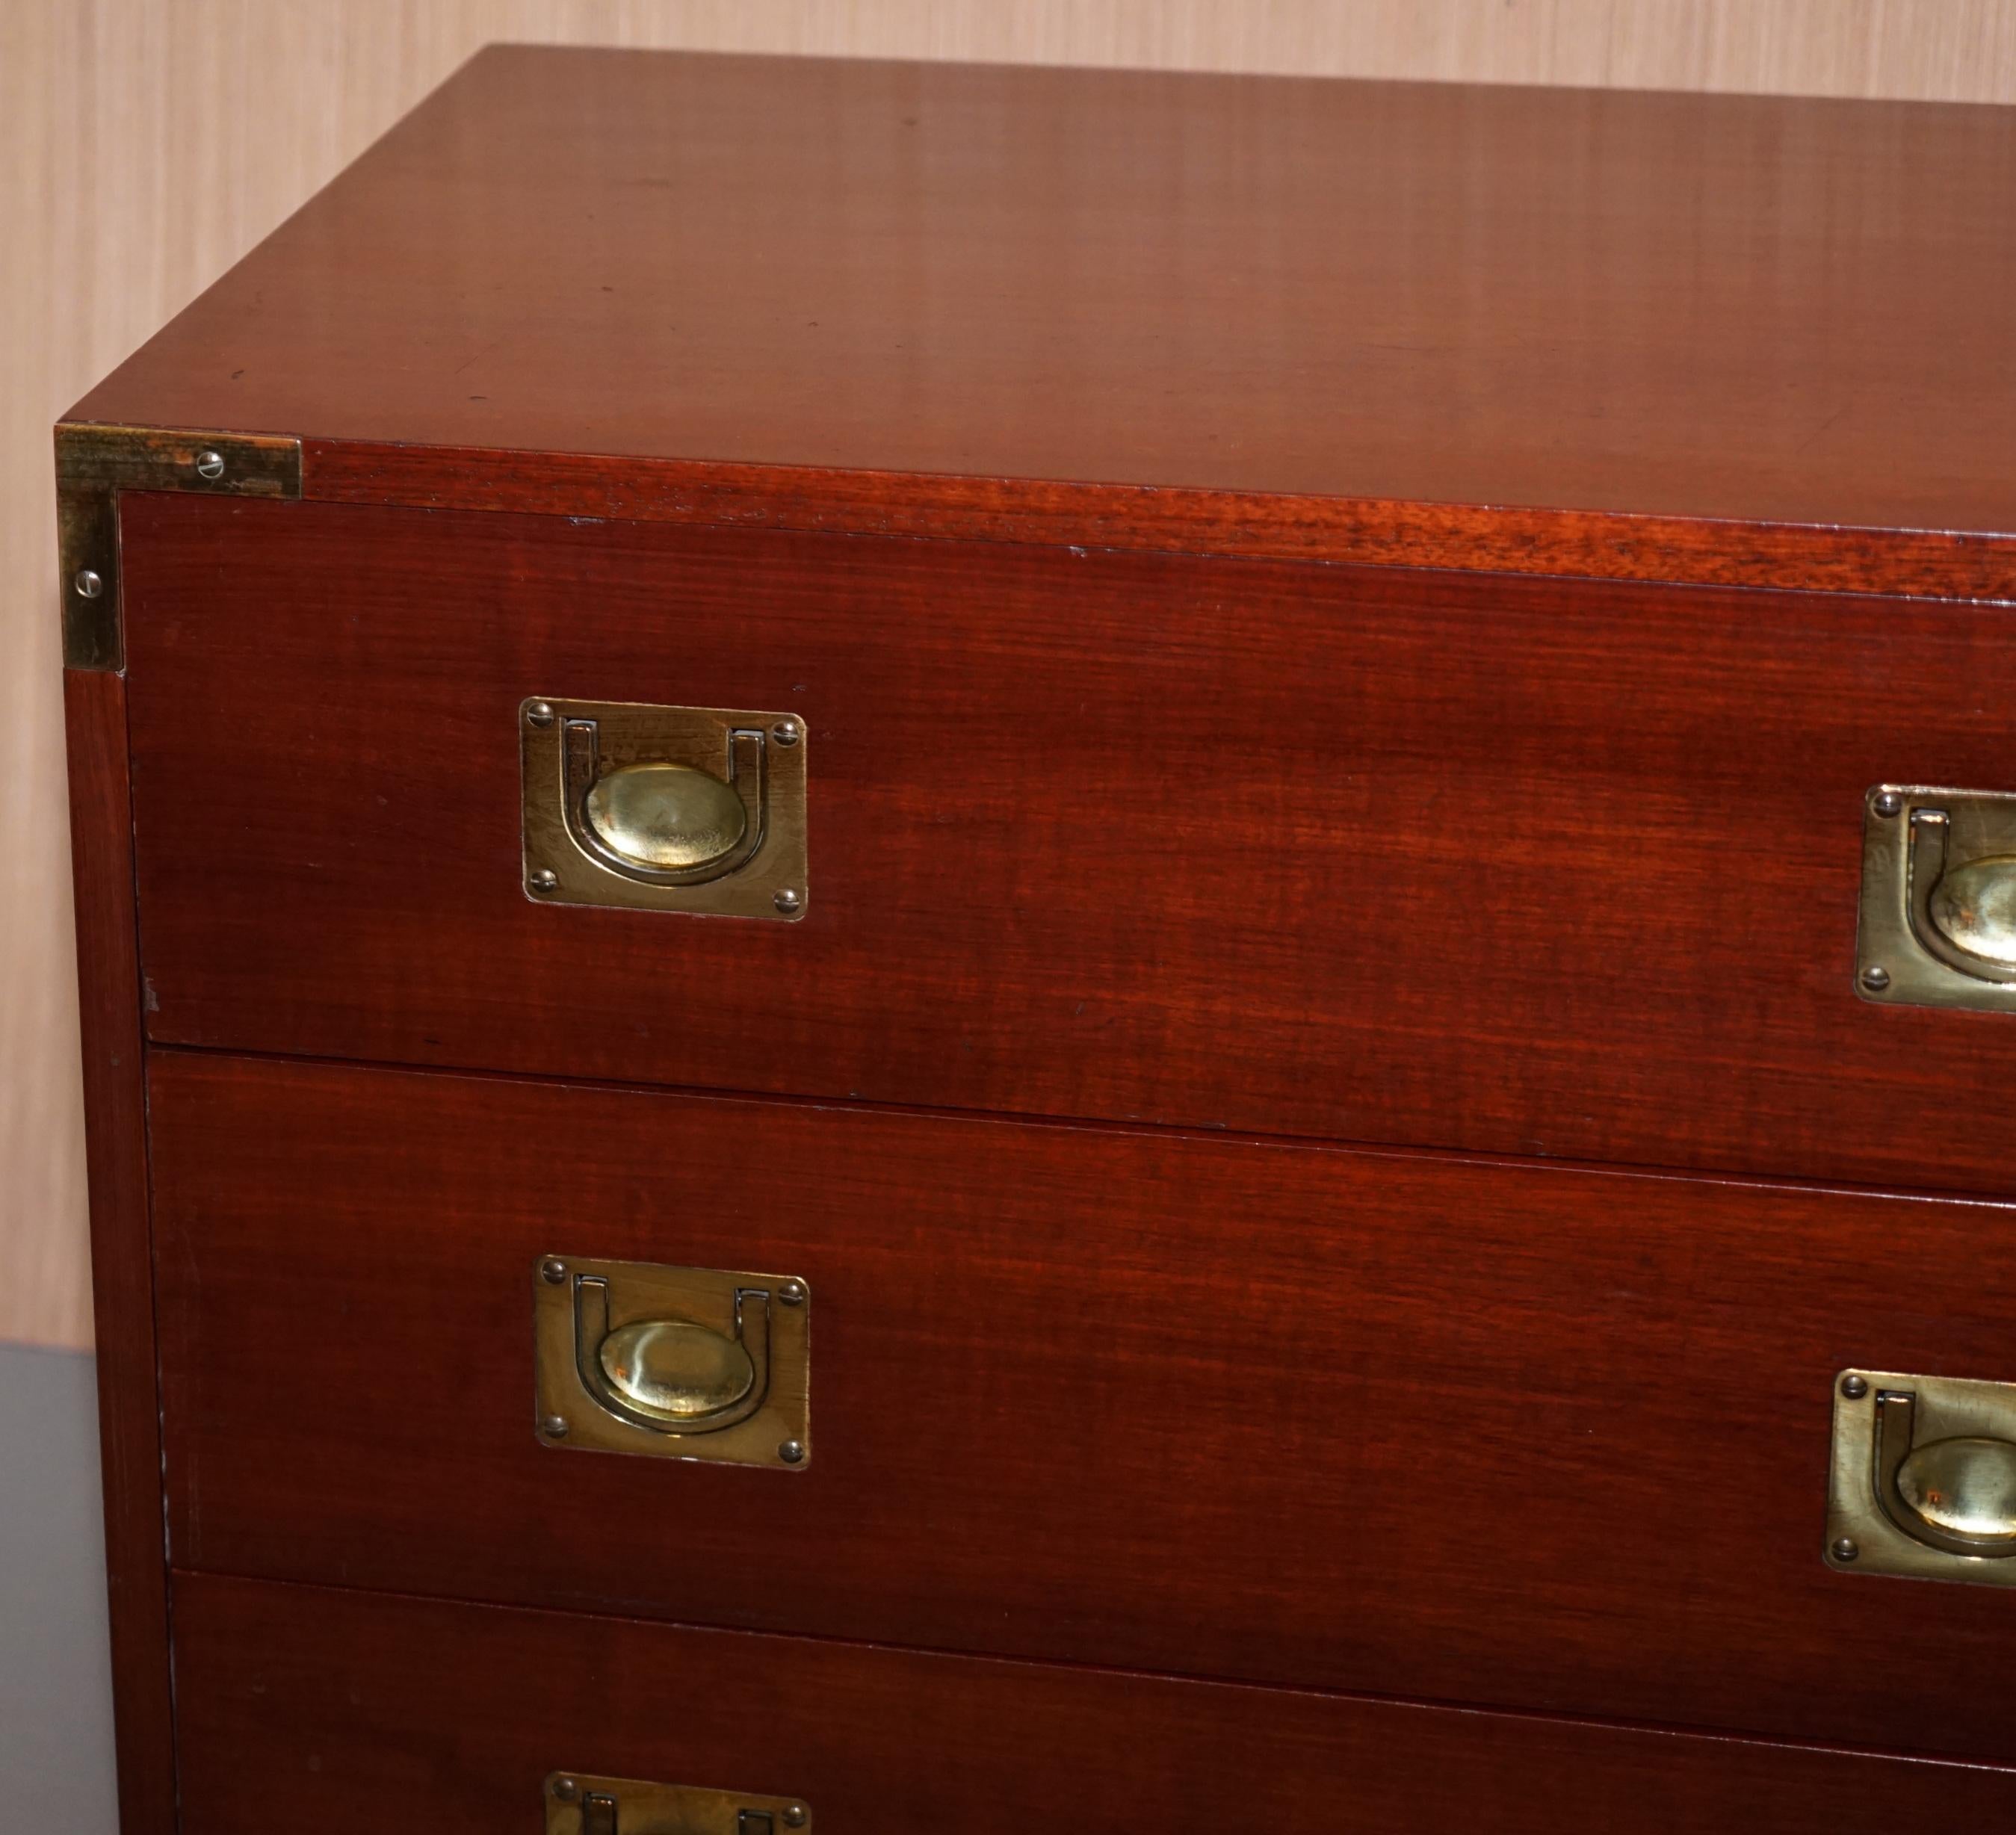 Hand-Crafted Pair of Mahogany Military Campaign Style Chests of Drawers Nice Sizes Any Room